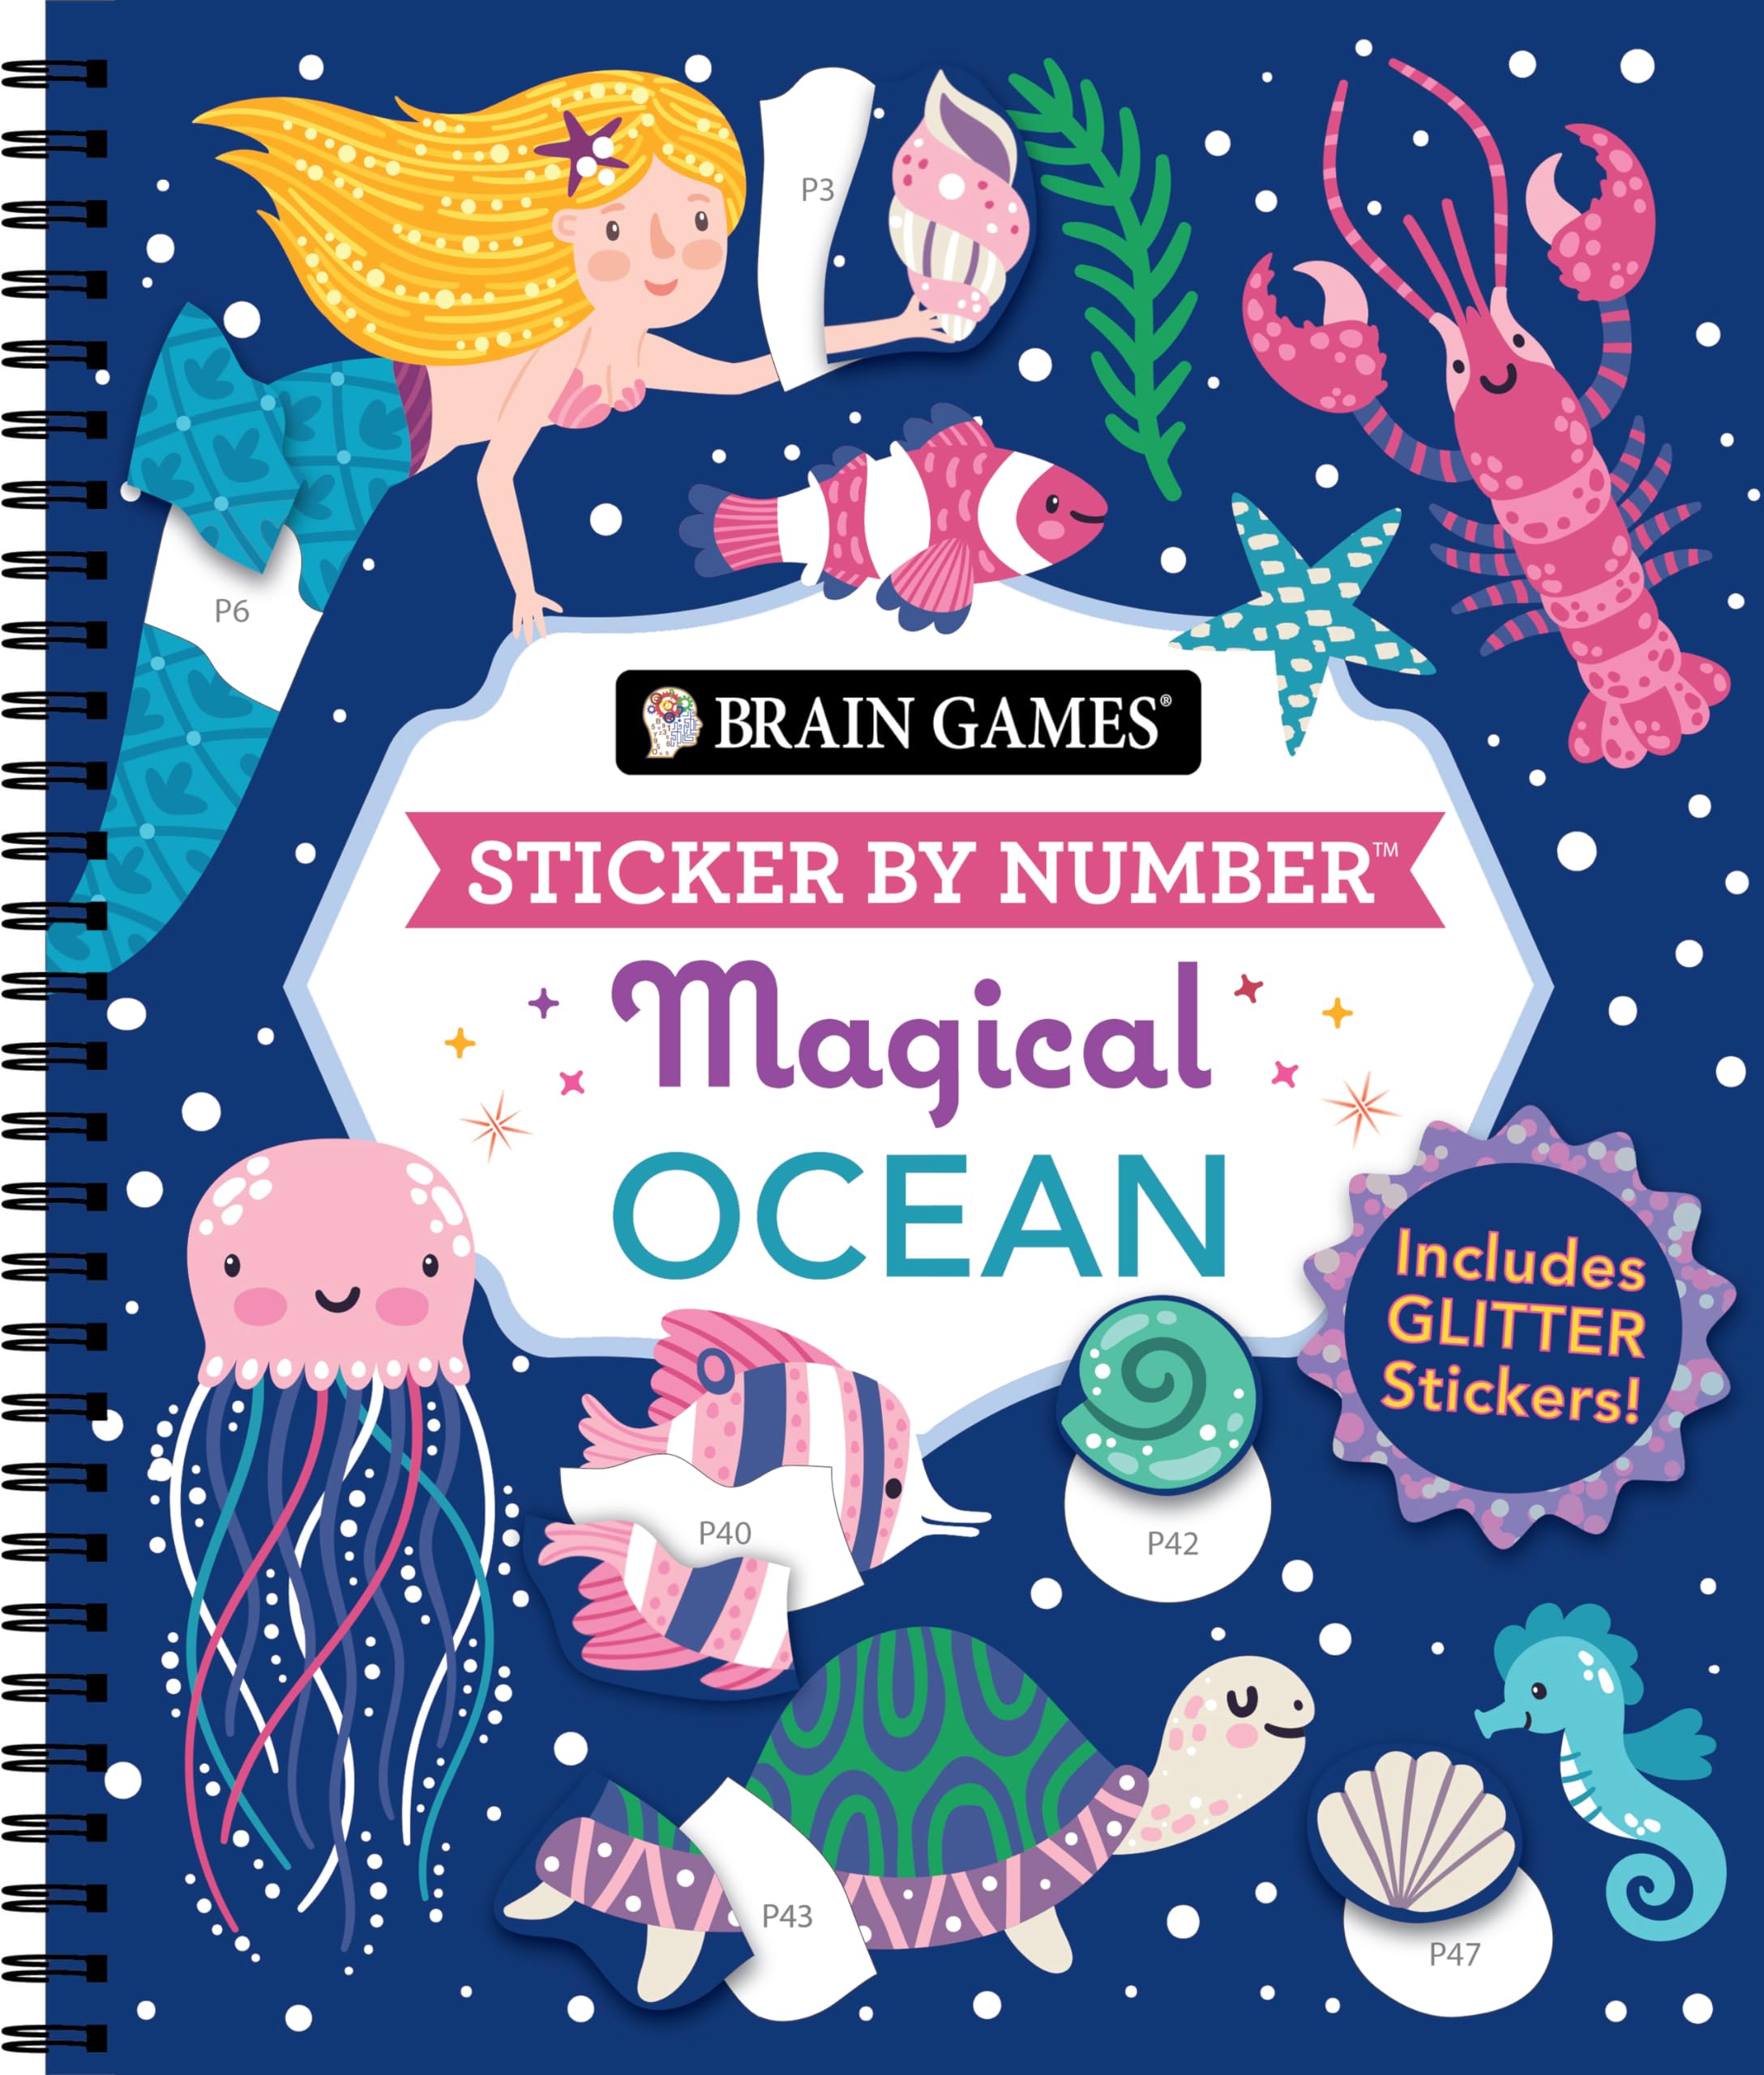 Brain Games - Sticker by Number: Magical Ocean